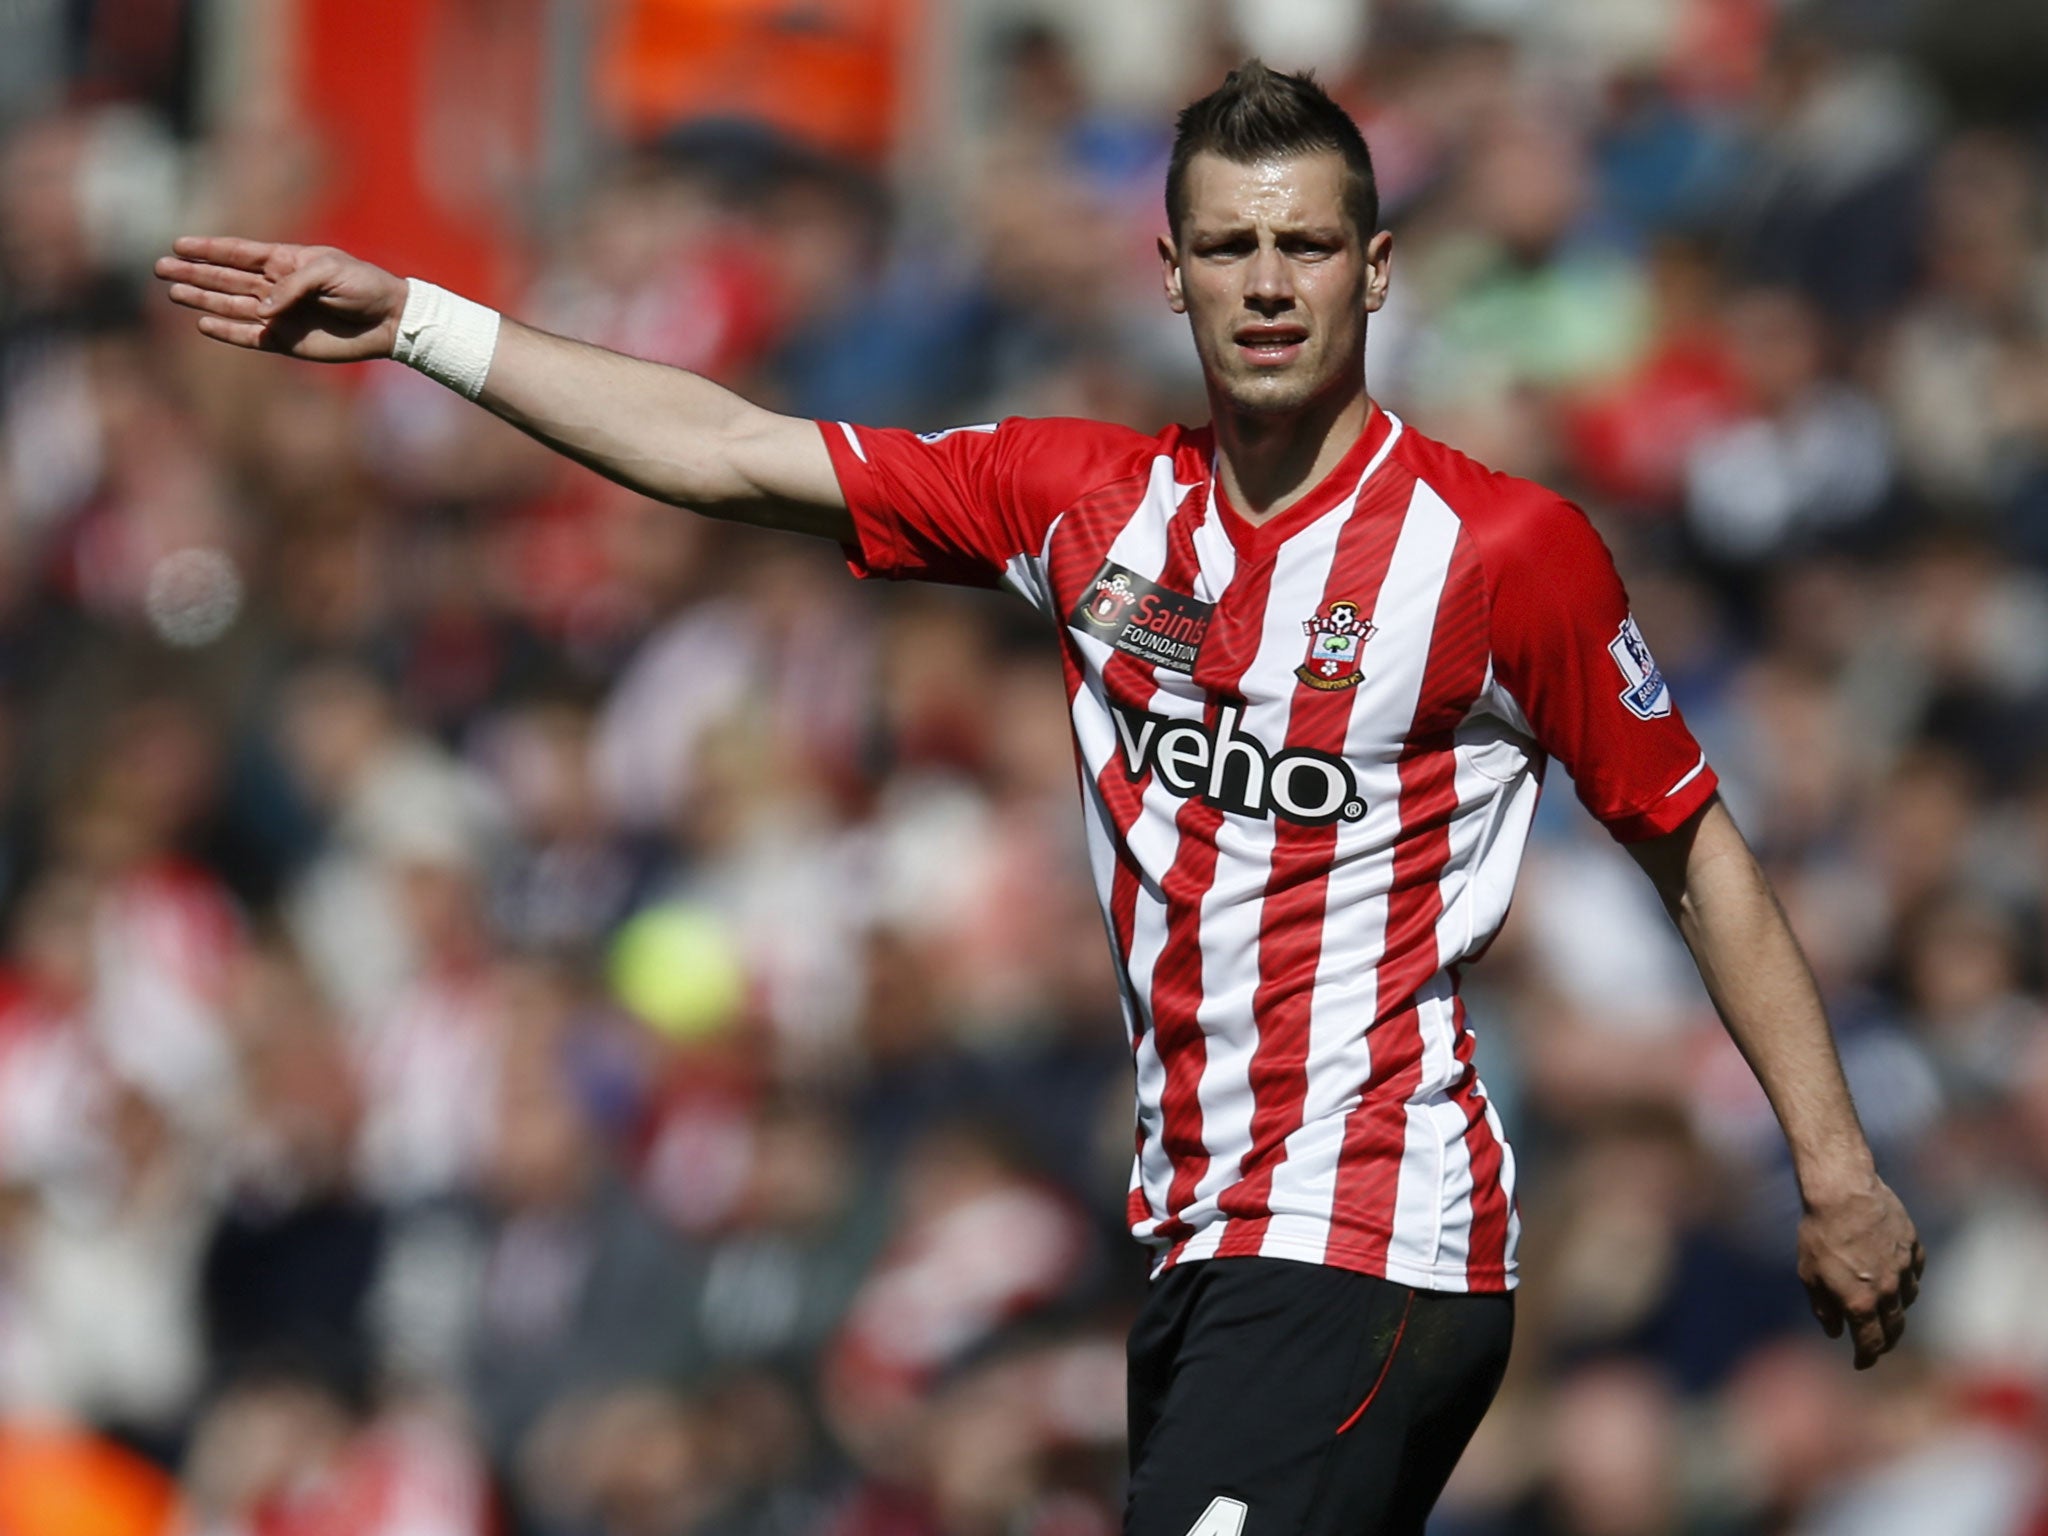 Morgan Schneiderlin has been linked with Manchester United and Arsenal